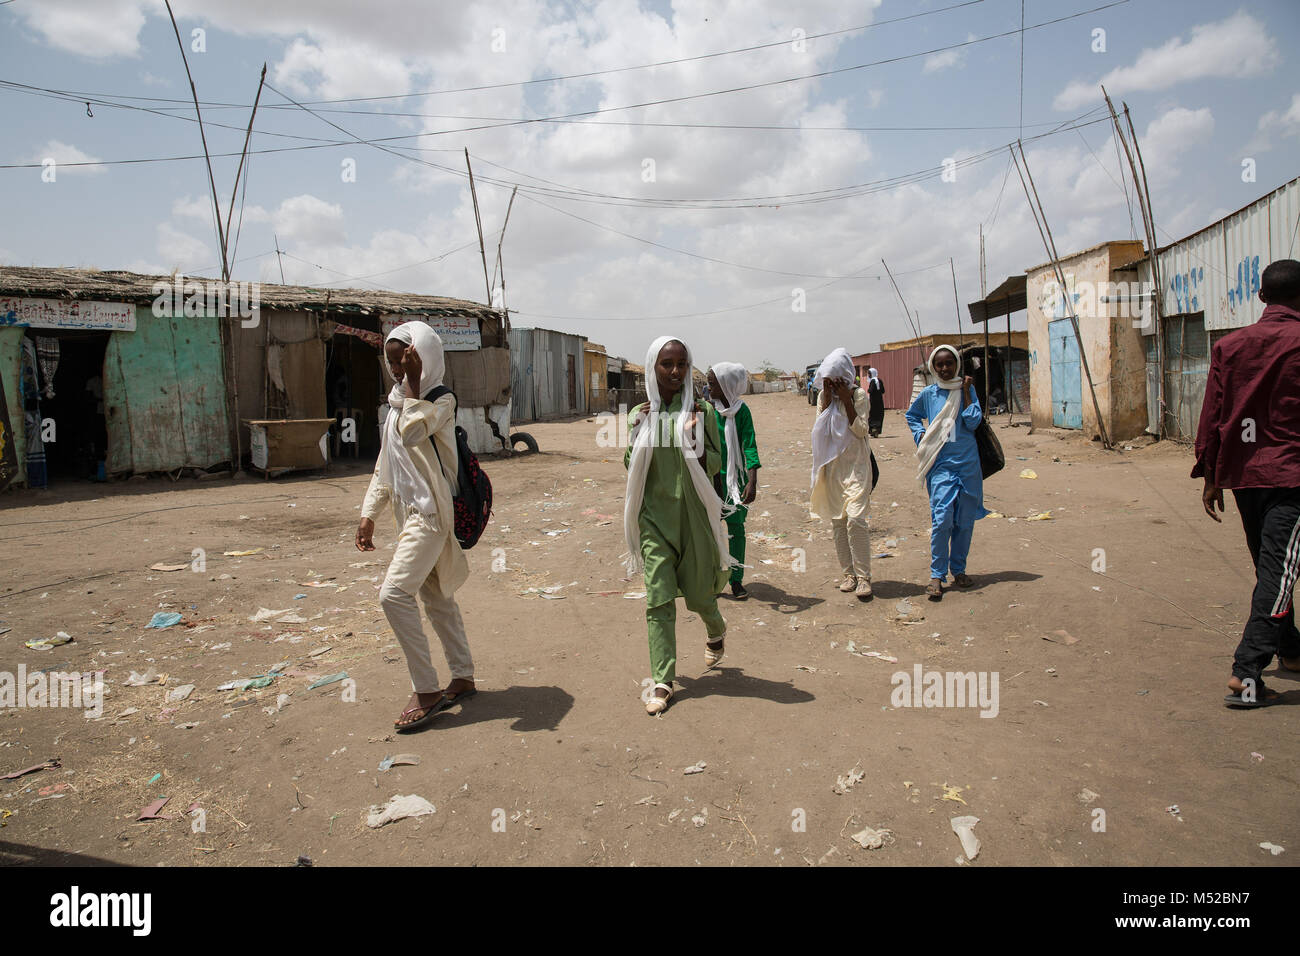 Young refugees walk to school in Shagarab refugee camp, eastern Sudan. Tens of thousands of refugees live here, after escaping mandatory, unending military service and repression in their home country. Stock Photo